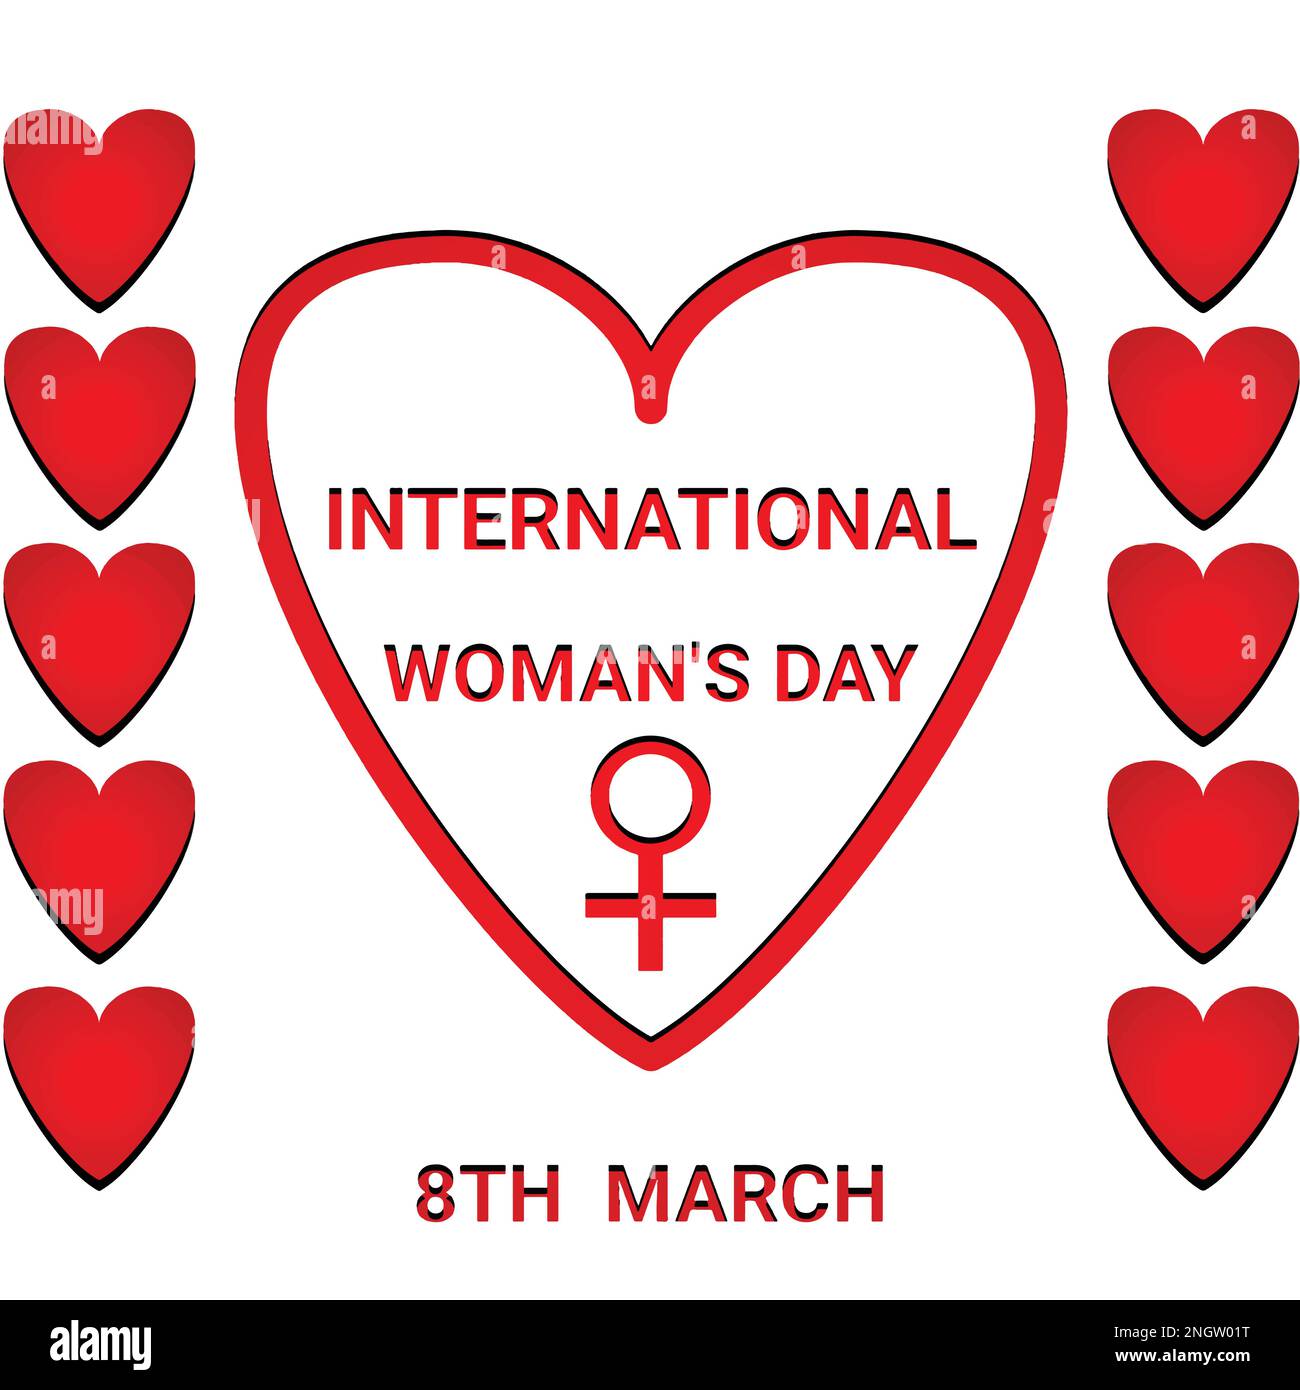 Happy Women's Day Typographical Design Elements. International women's day icon with love Hearts shape. Minimalistic design for international women's Stock Vector